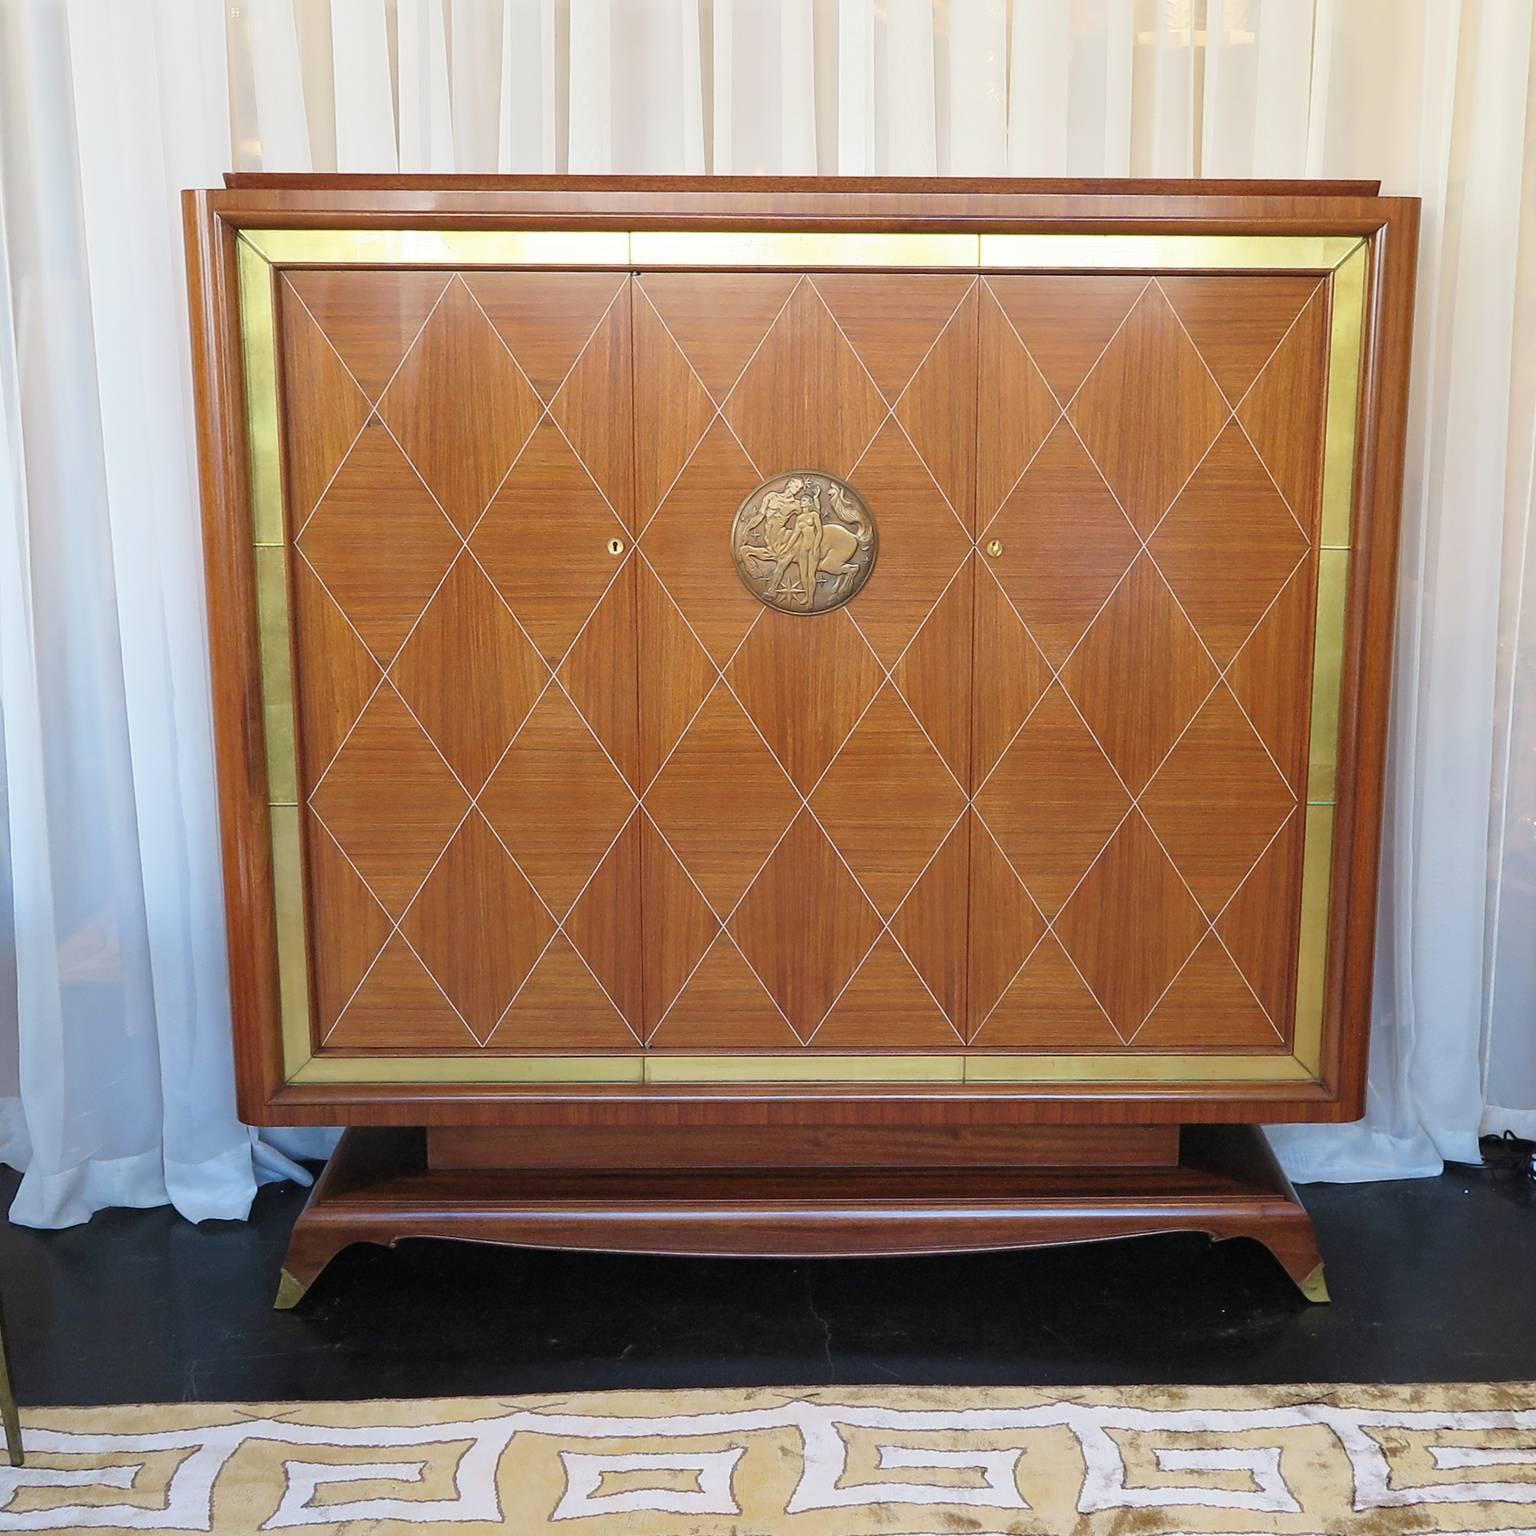 French Art Deco armoire by Jean Desnos for Rambaudi-Dantoine. Beautiful rosewood marquetry doors with criss cross inlay. Mahogany frame with gold leaf mirrored border and brass sabots. Center bronze medallion of centaur and goddess. Signature on